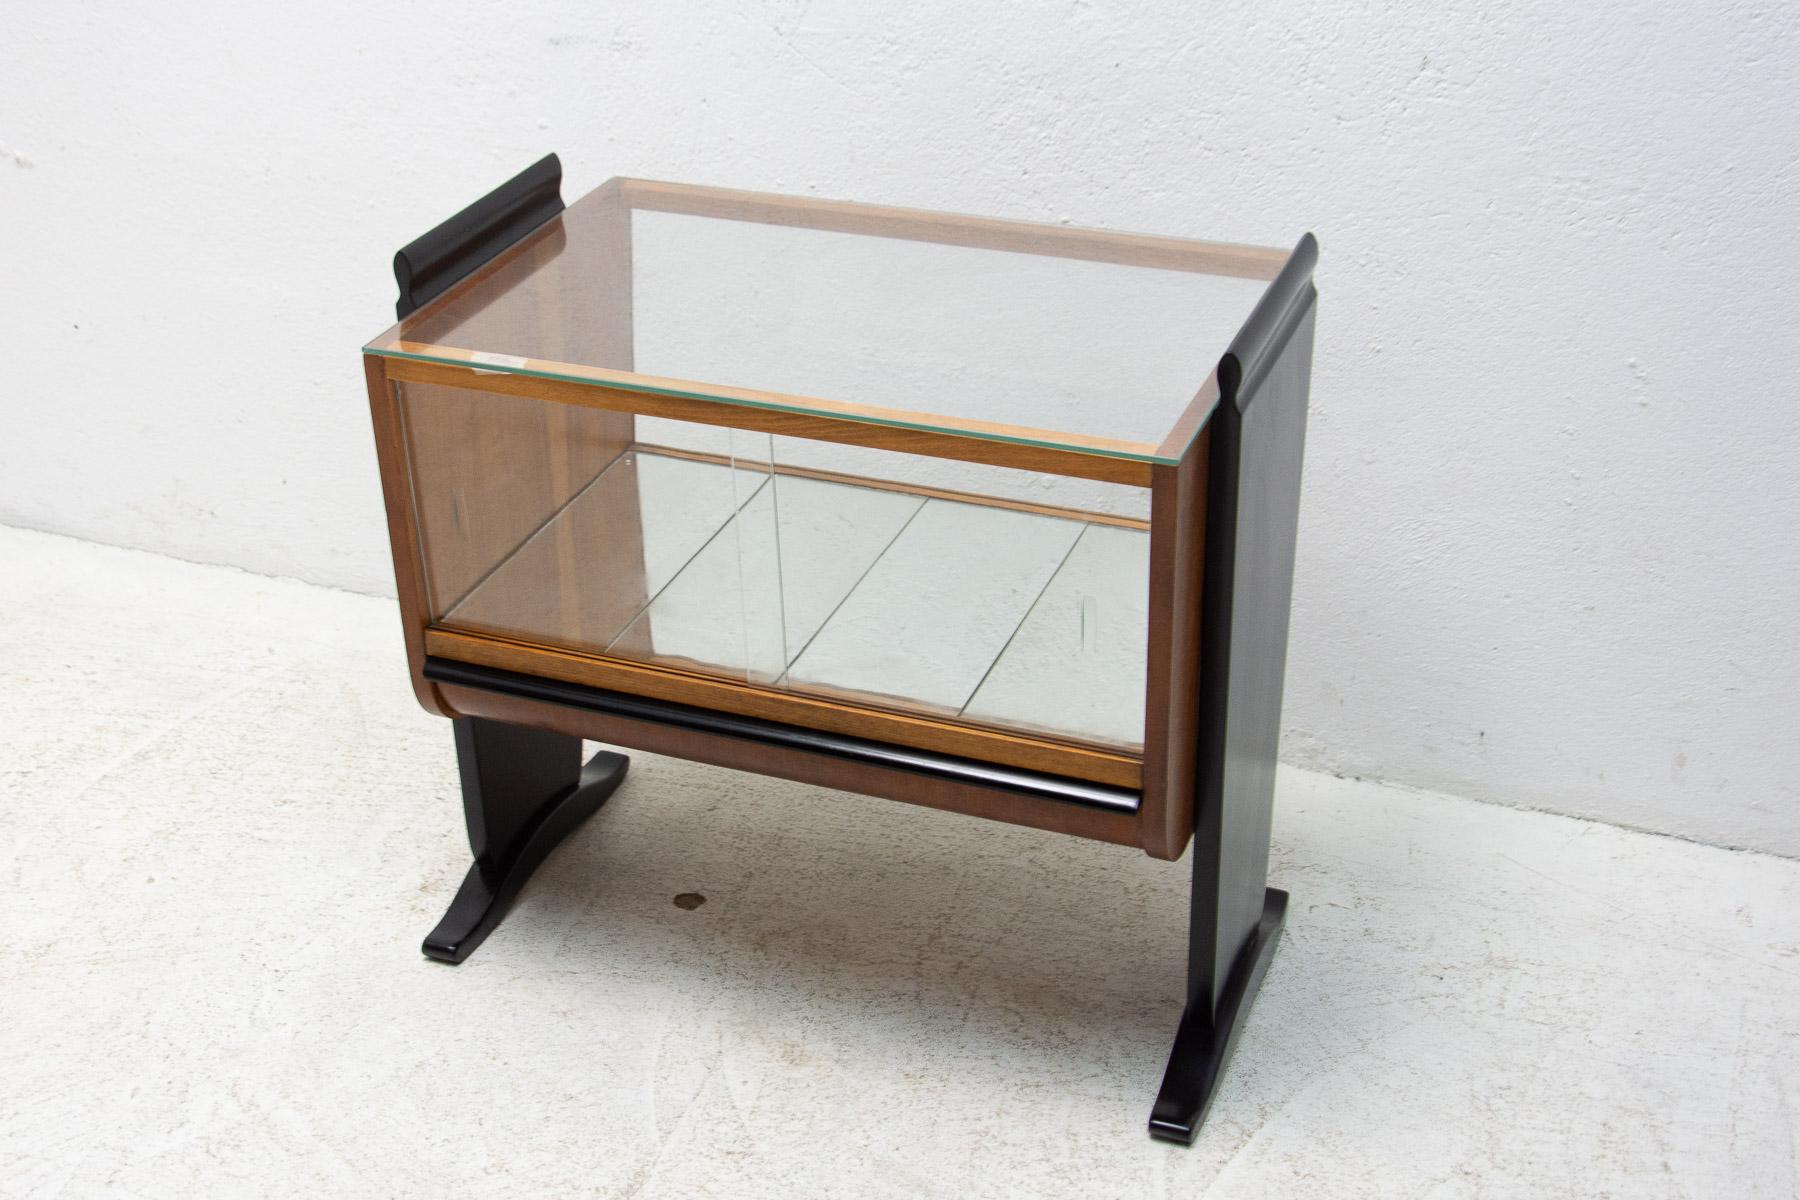 Art Deco glass drinks cabinet/bar, made in Czechoslovakia probably in the 1930´s by the world famous architect Jindrich Halabala and manufactured by UP-Zavody. Made from beech with walnut veneer, black lacquered legs, glass top and doors. Fully